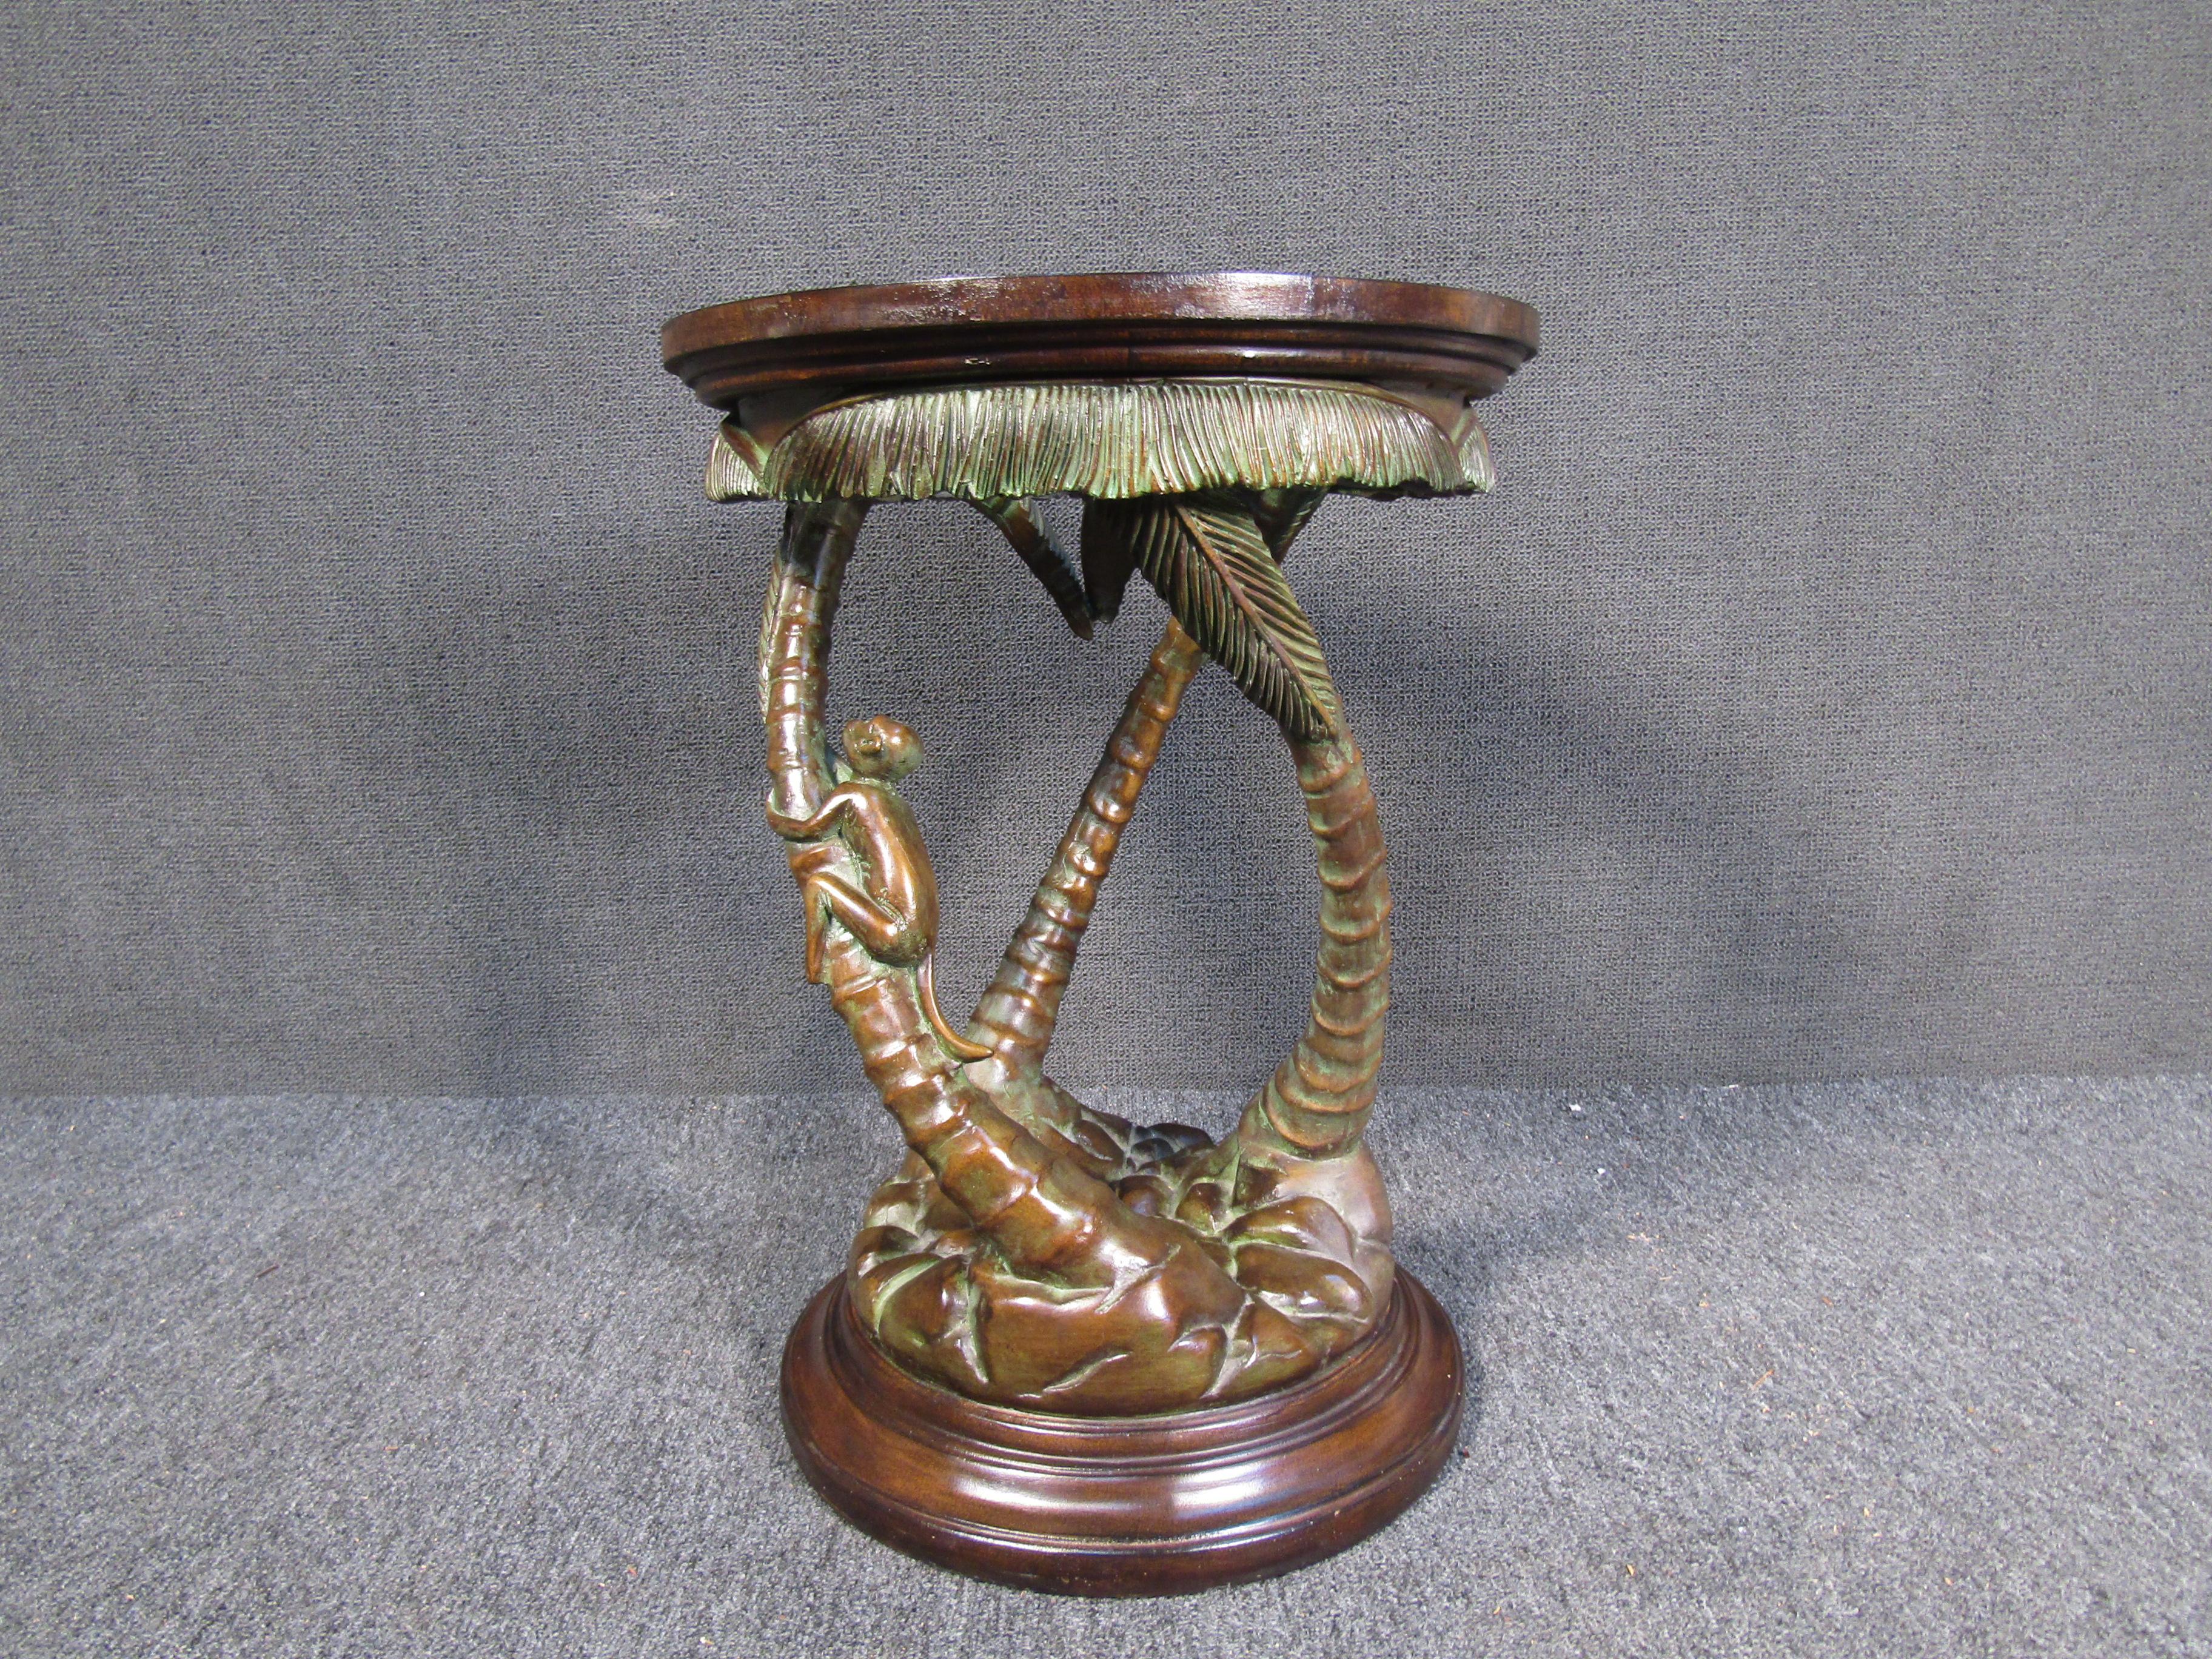 With intricate details including a monkey and palm trees, this vintage end table features a sculptural base of wood and bronze with a glass top. Please confirm item location with seller (NY/NJ).